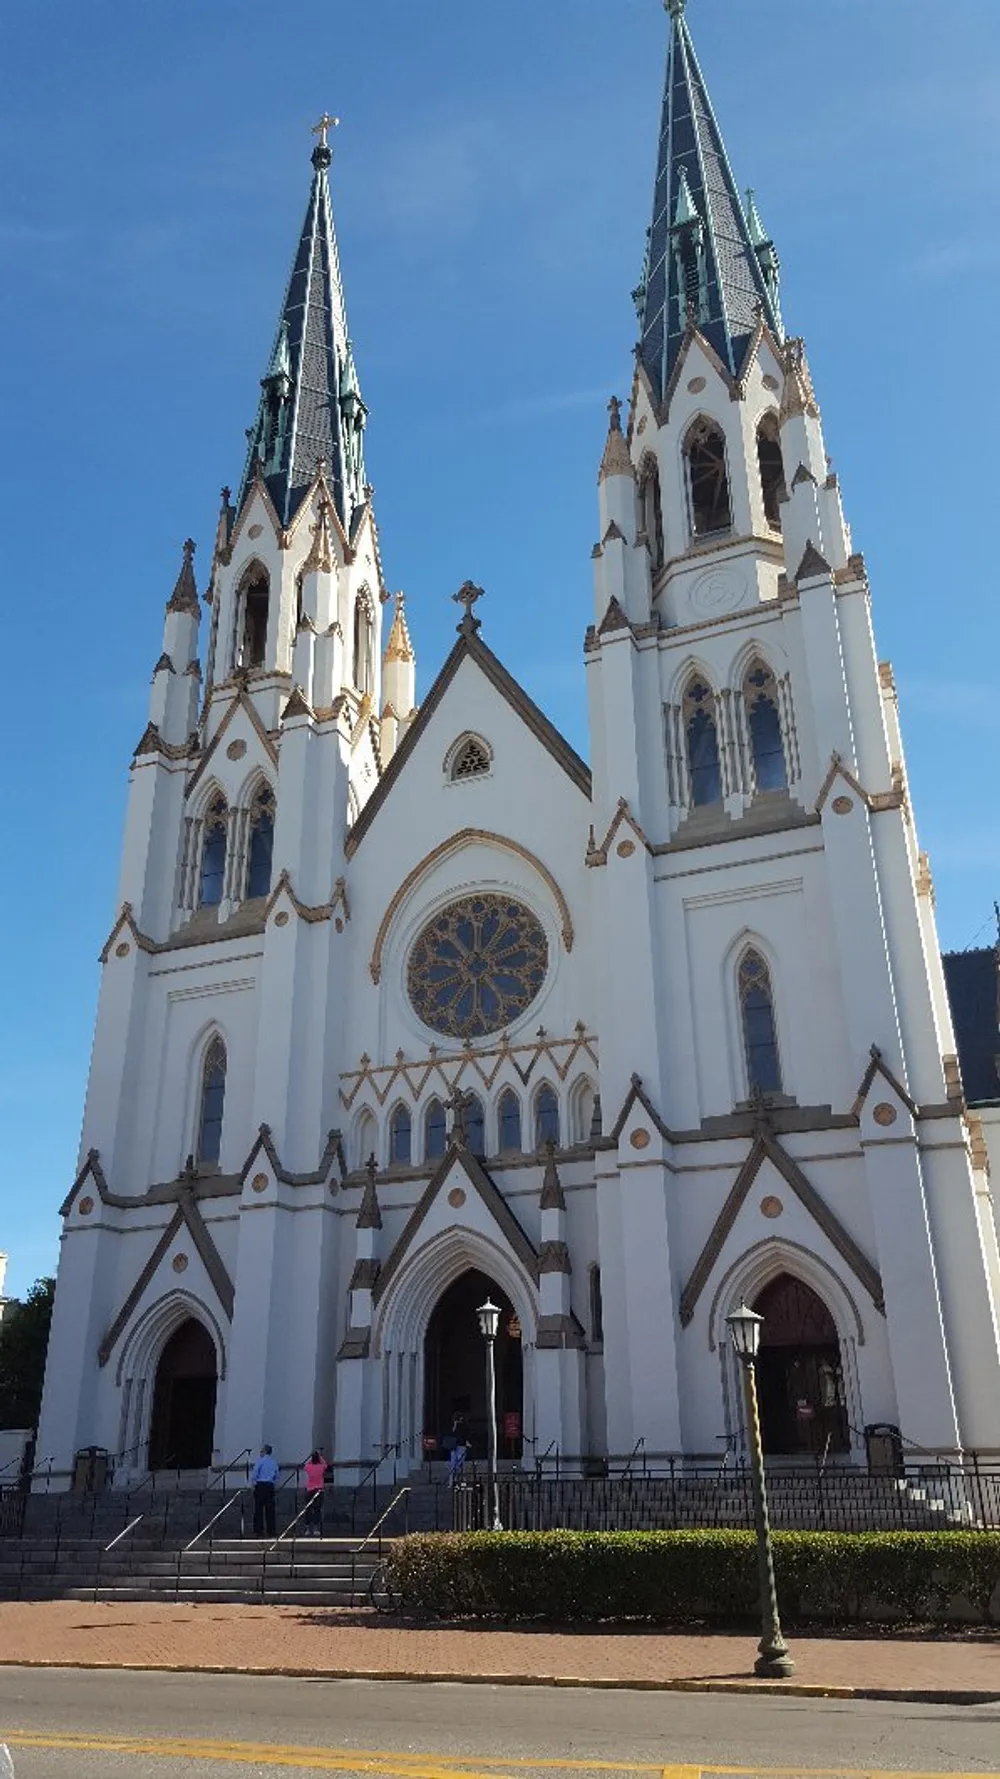 This image shows a grand white cathedral with two towering spires against a clear blue sky with people approaching its entrance